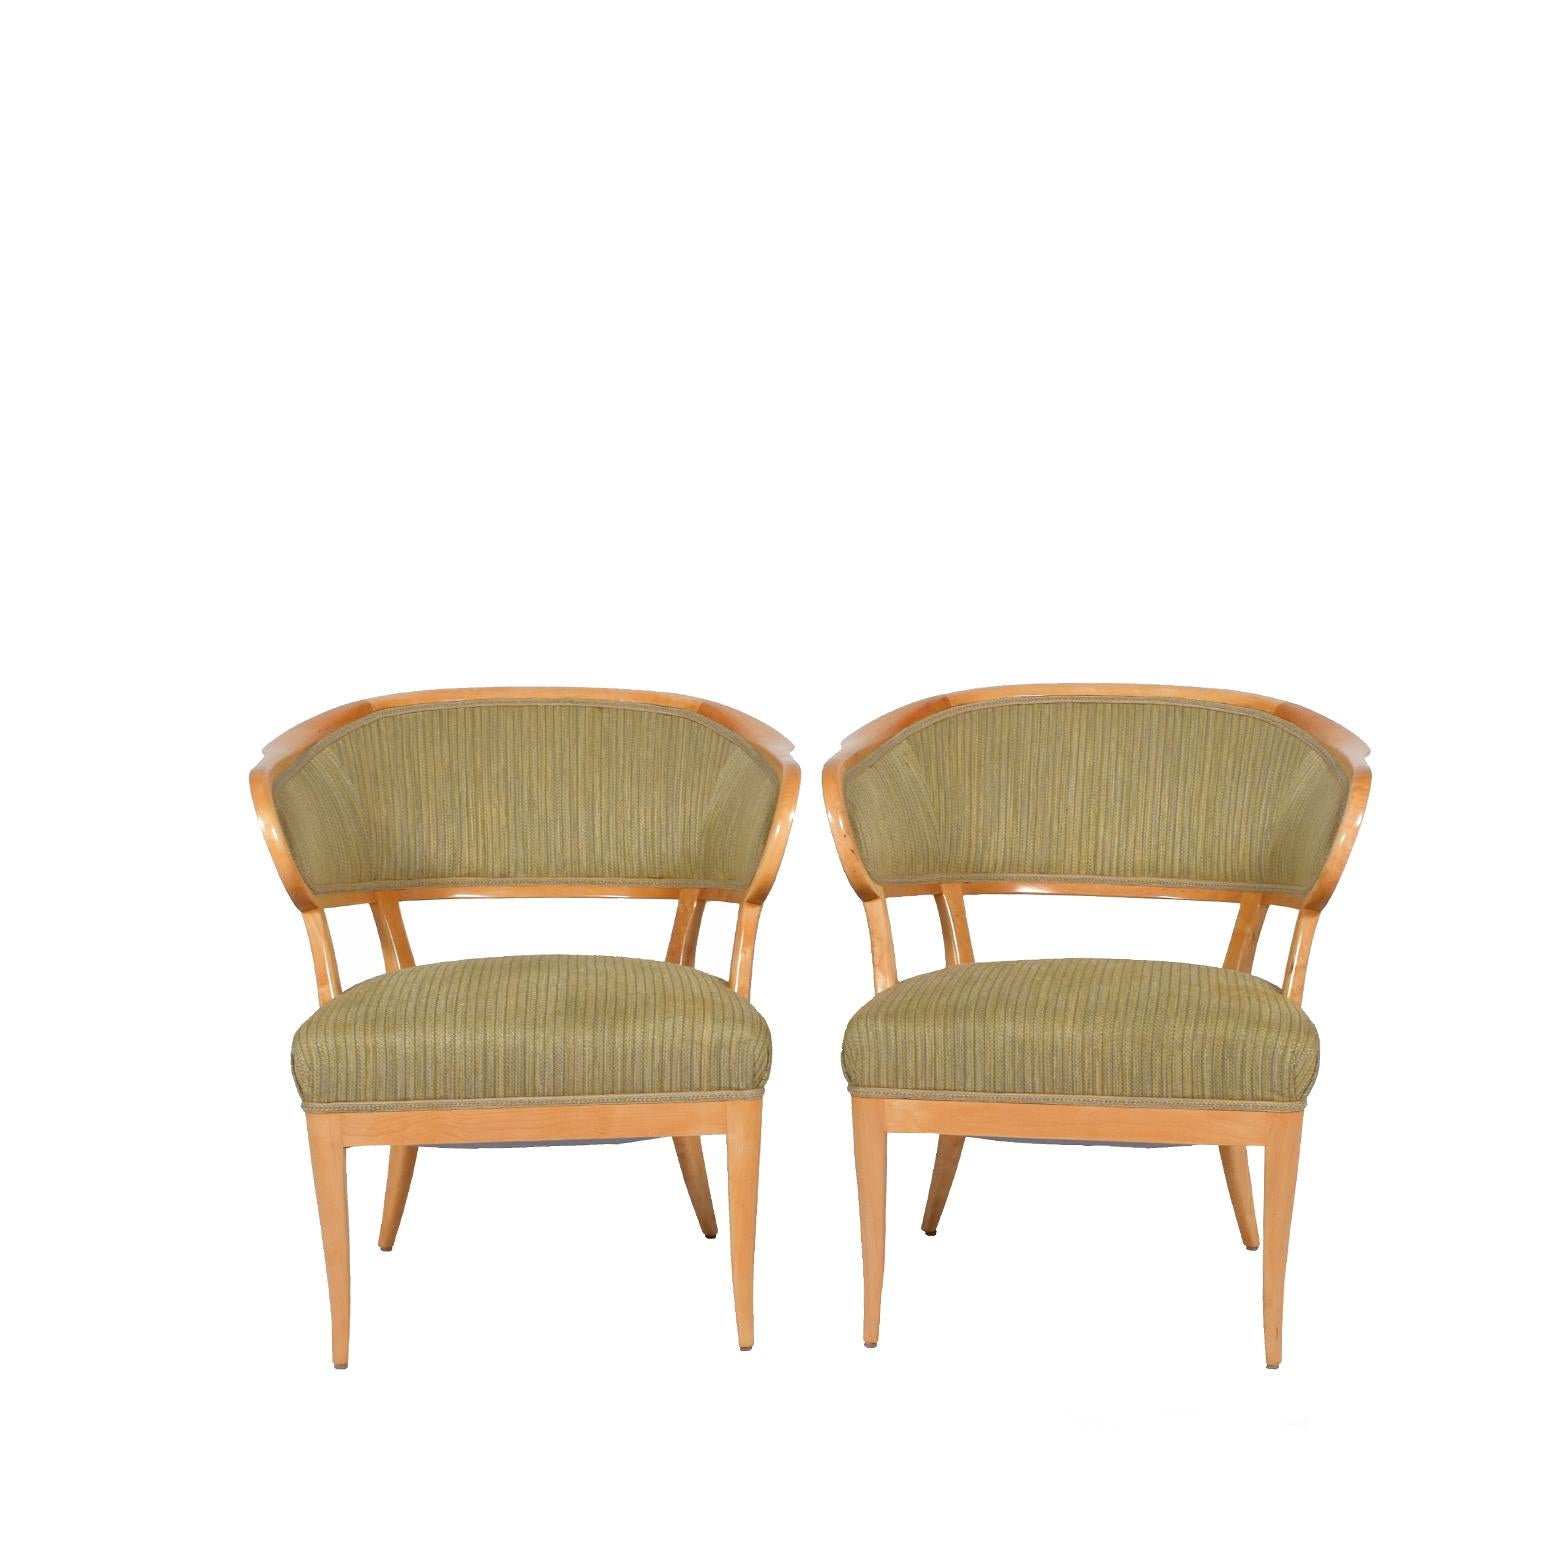 Carl Malmsten designed the pair of chairs in 1938 solid birch wood this exeple made after the WW II Branded manufacturer's mark to leg of each example ‘CM’.